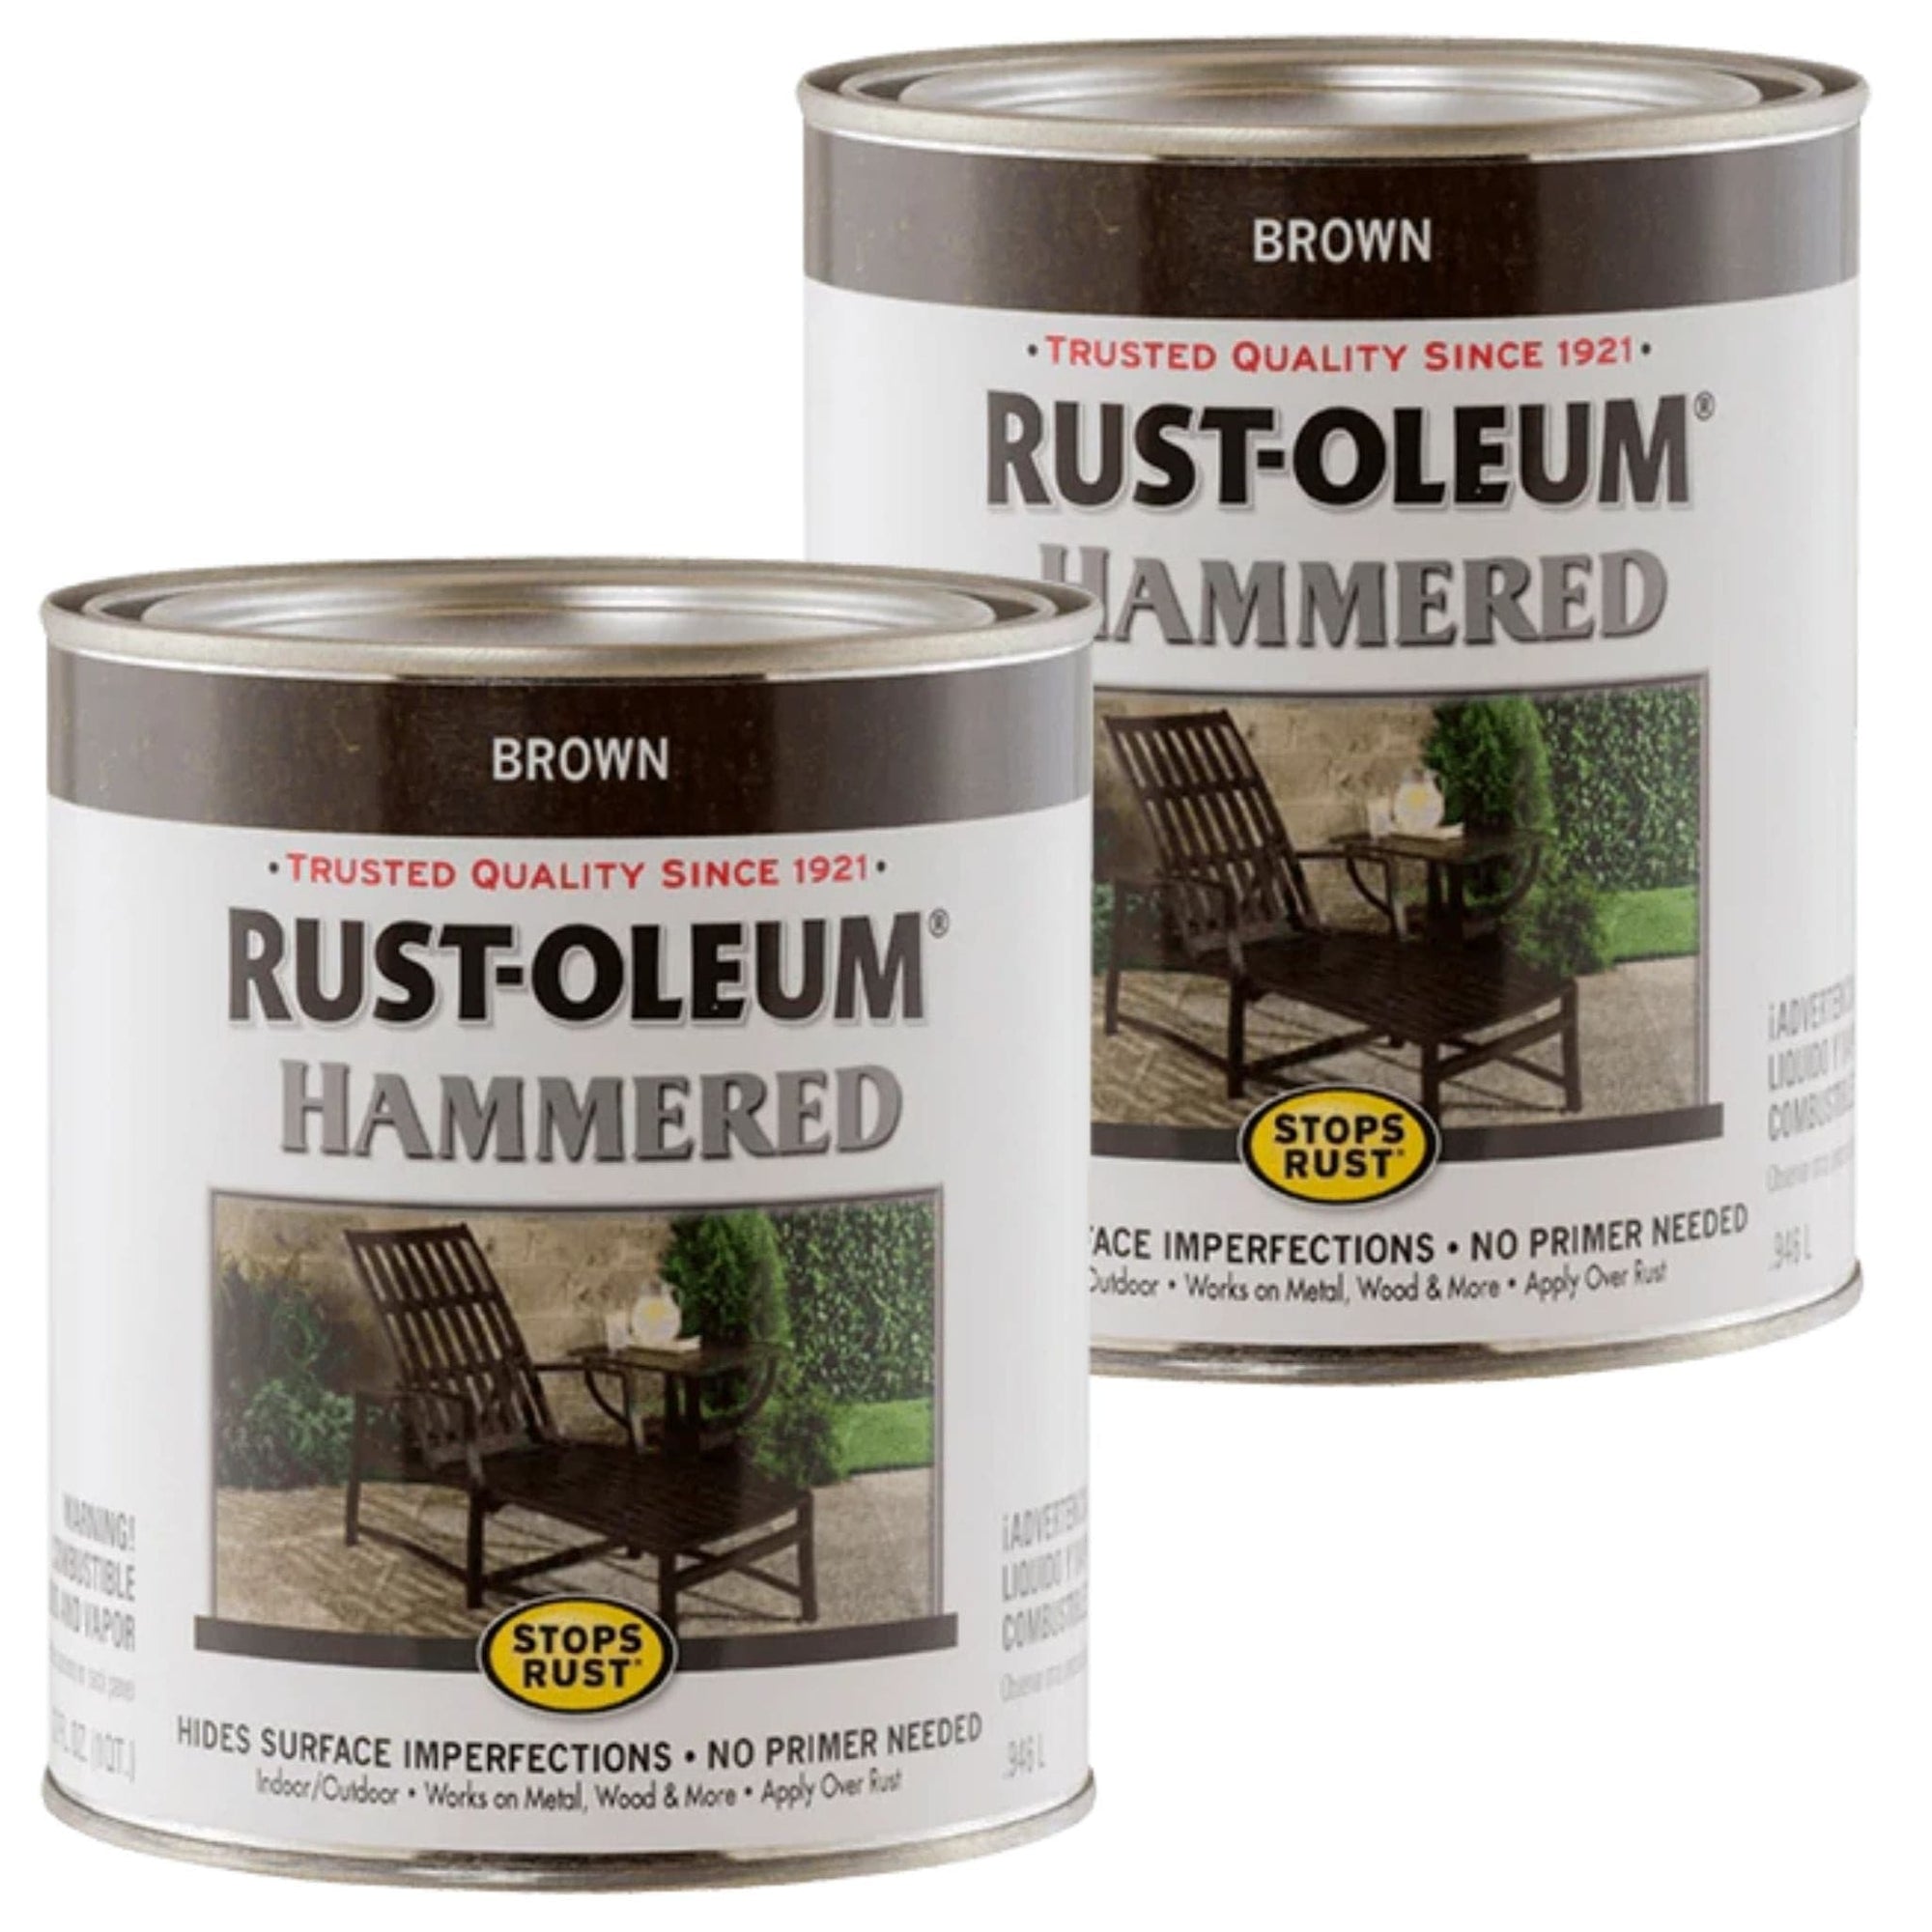 Rustoleum Stops Rust Hammered Paint - 946ml (2 PACK) - Brown - South East Clearance Centre